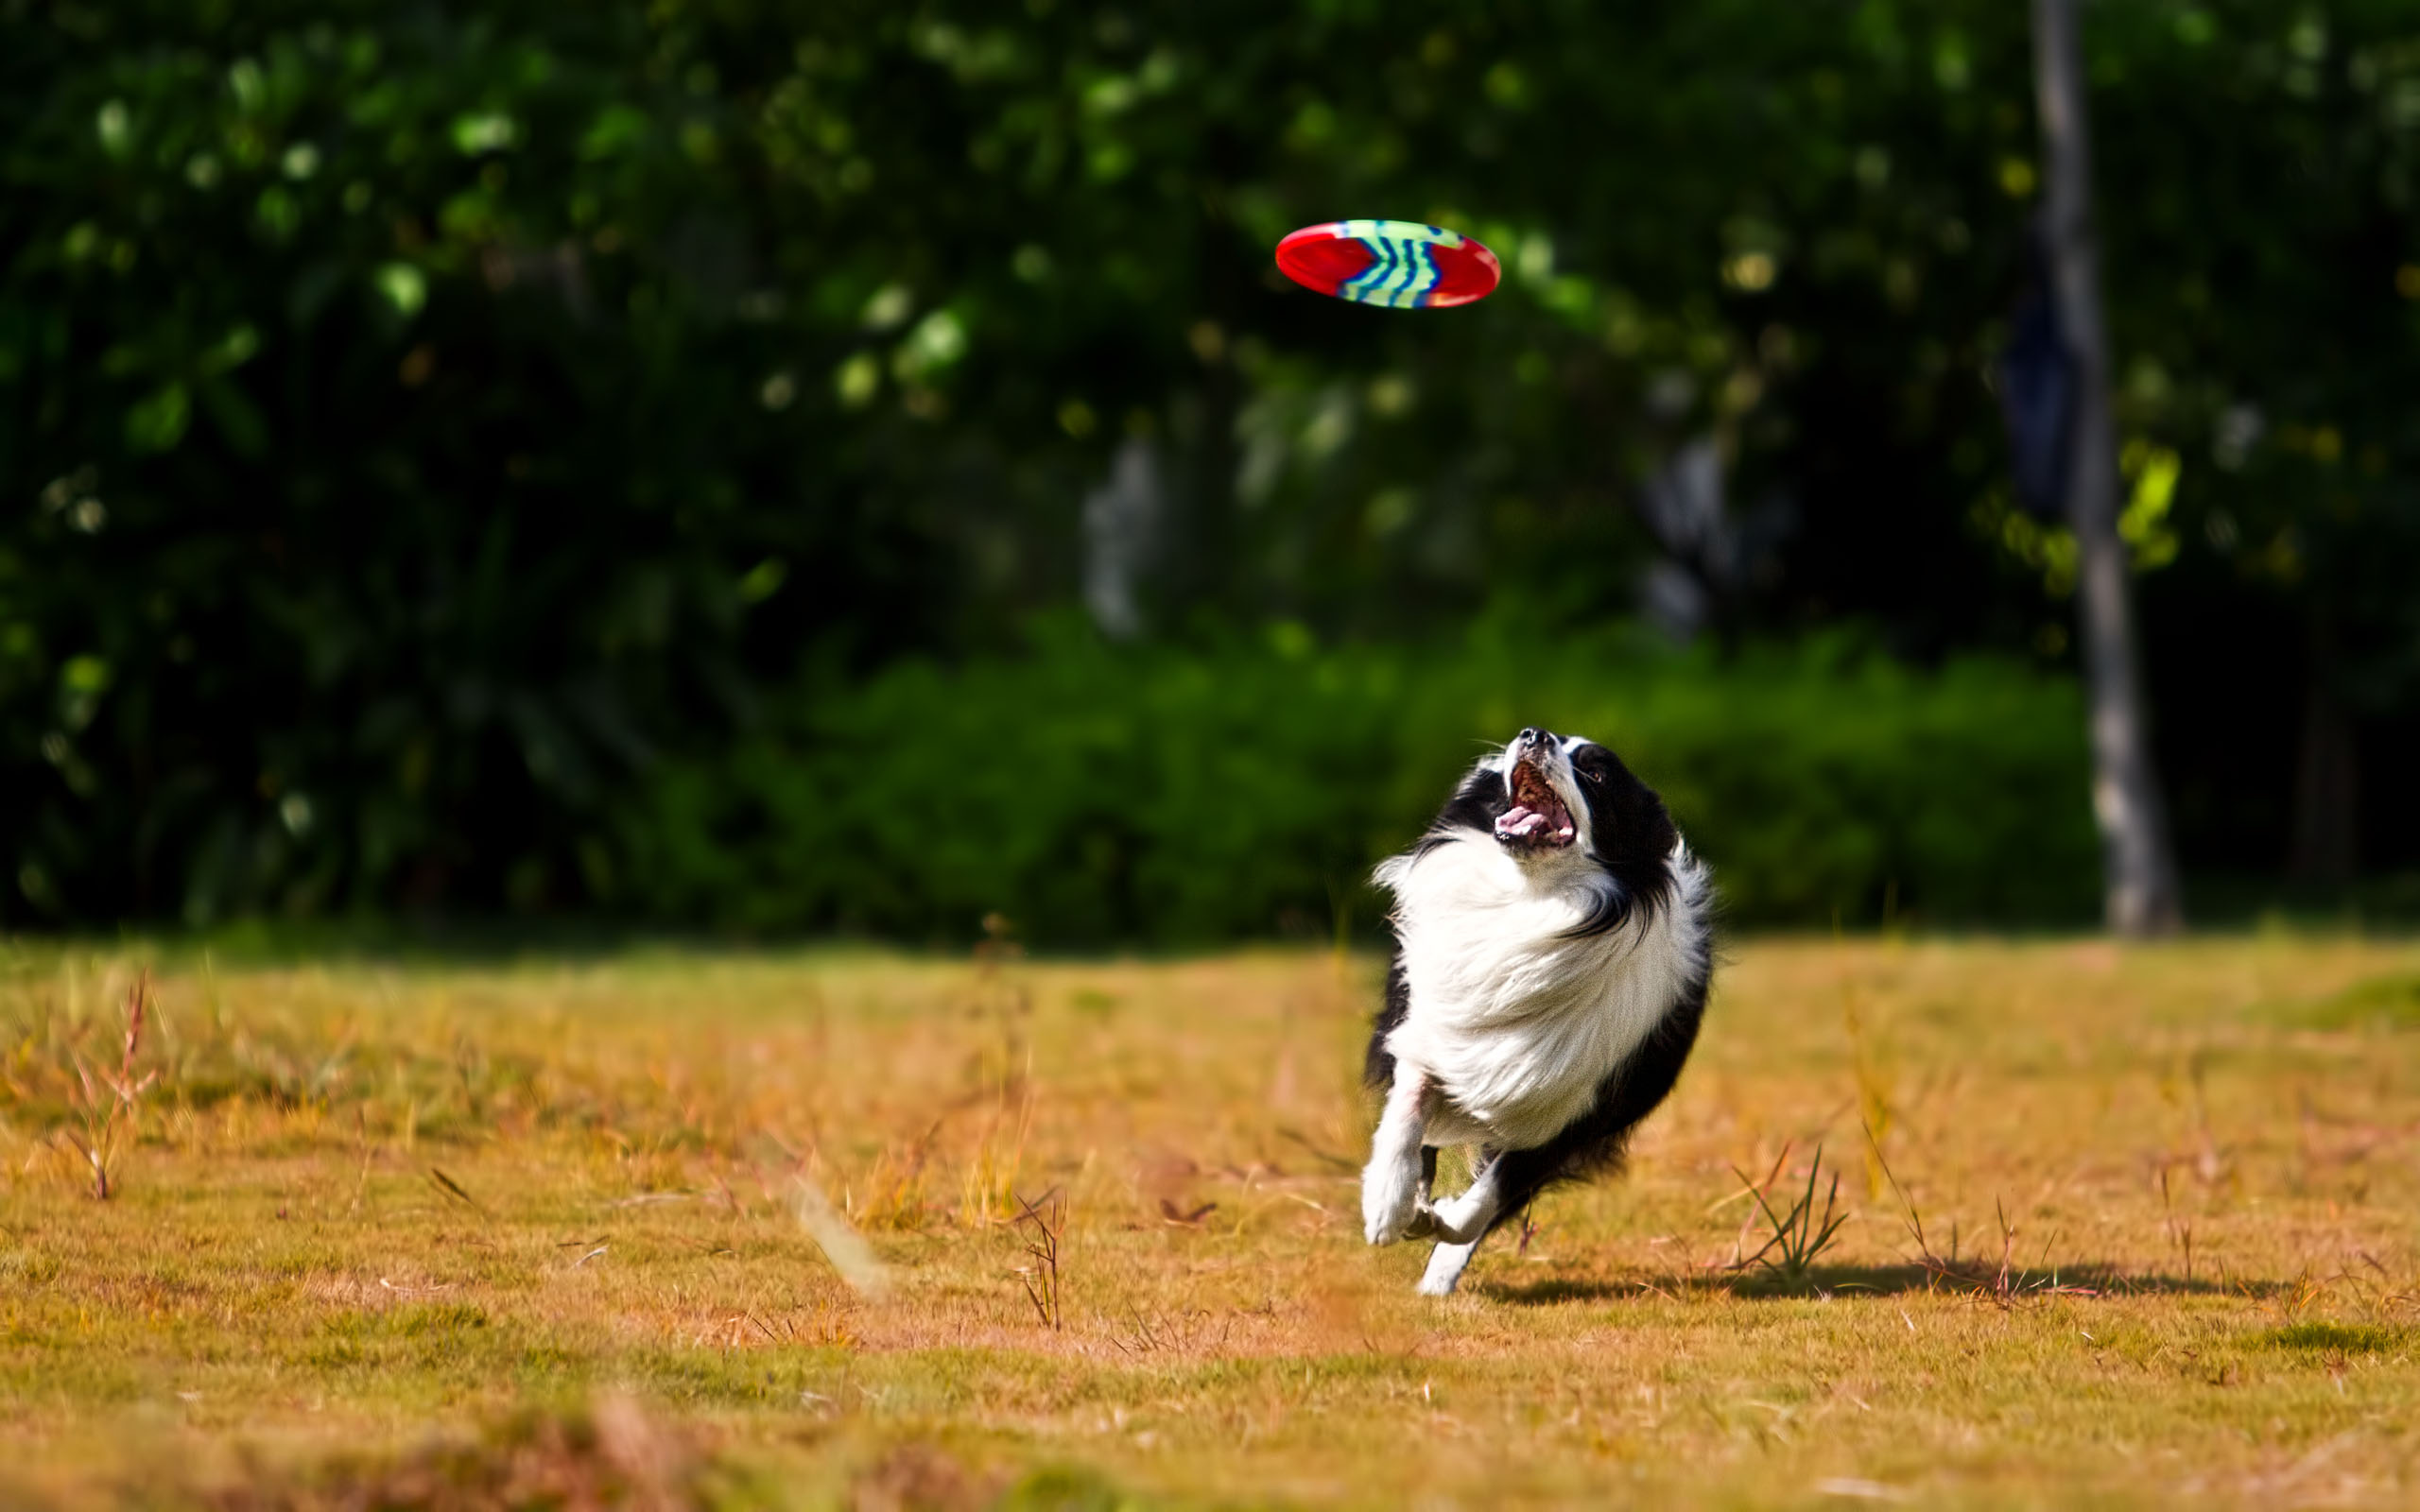 Flying Disc Sports: Distance Catching, Frisbee Throwers, Flyer Fetching Disc, Dog Toy Frisbee. 2560x1600 HD Wallpaper.